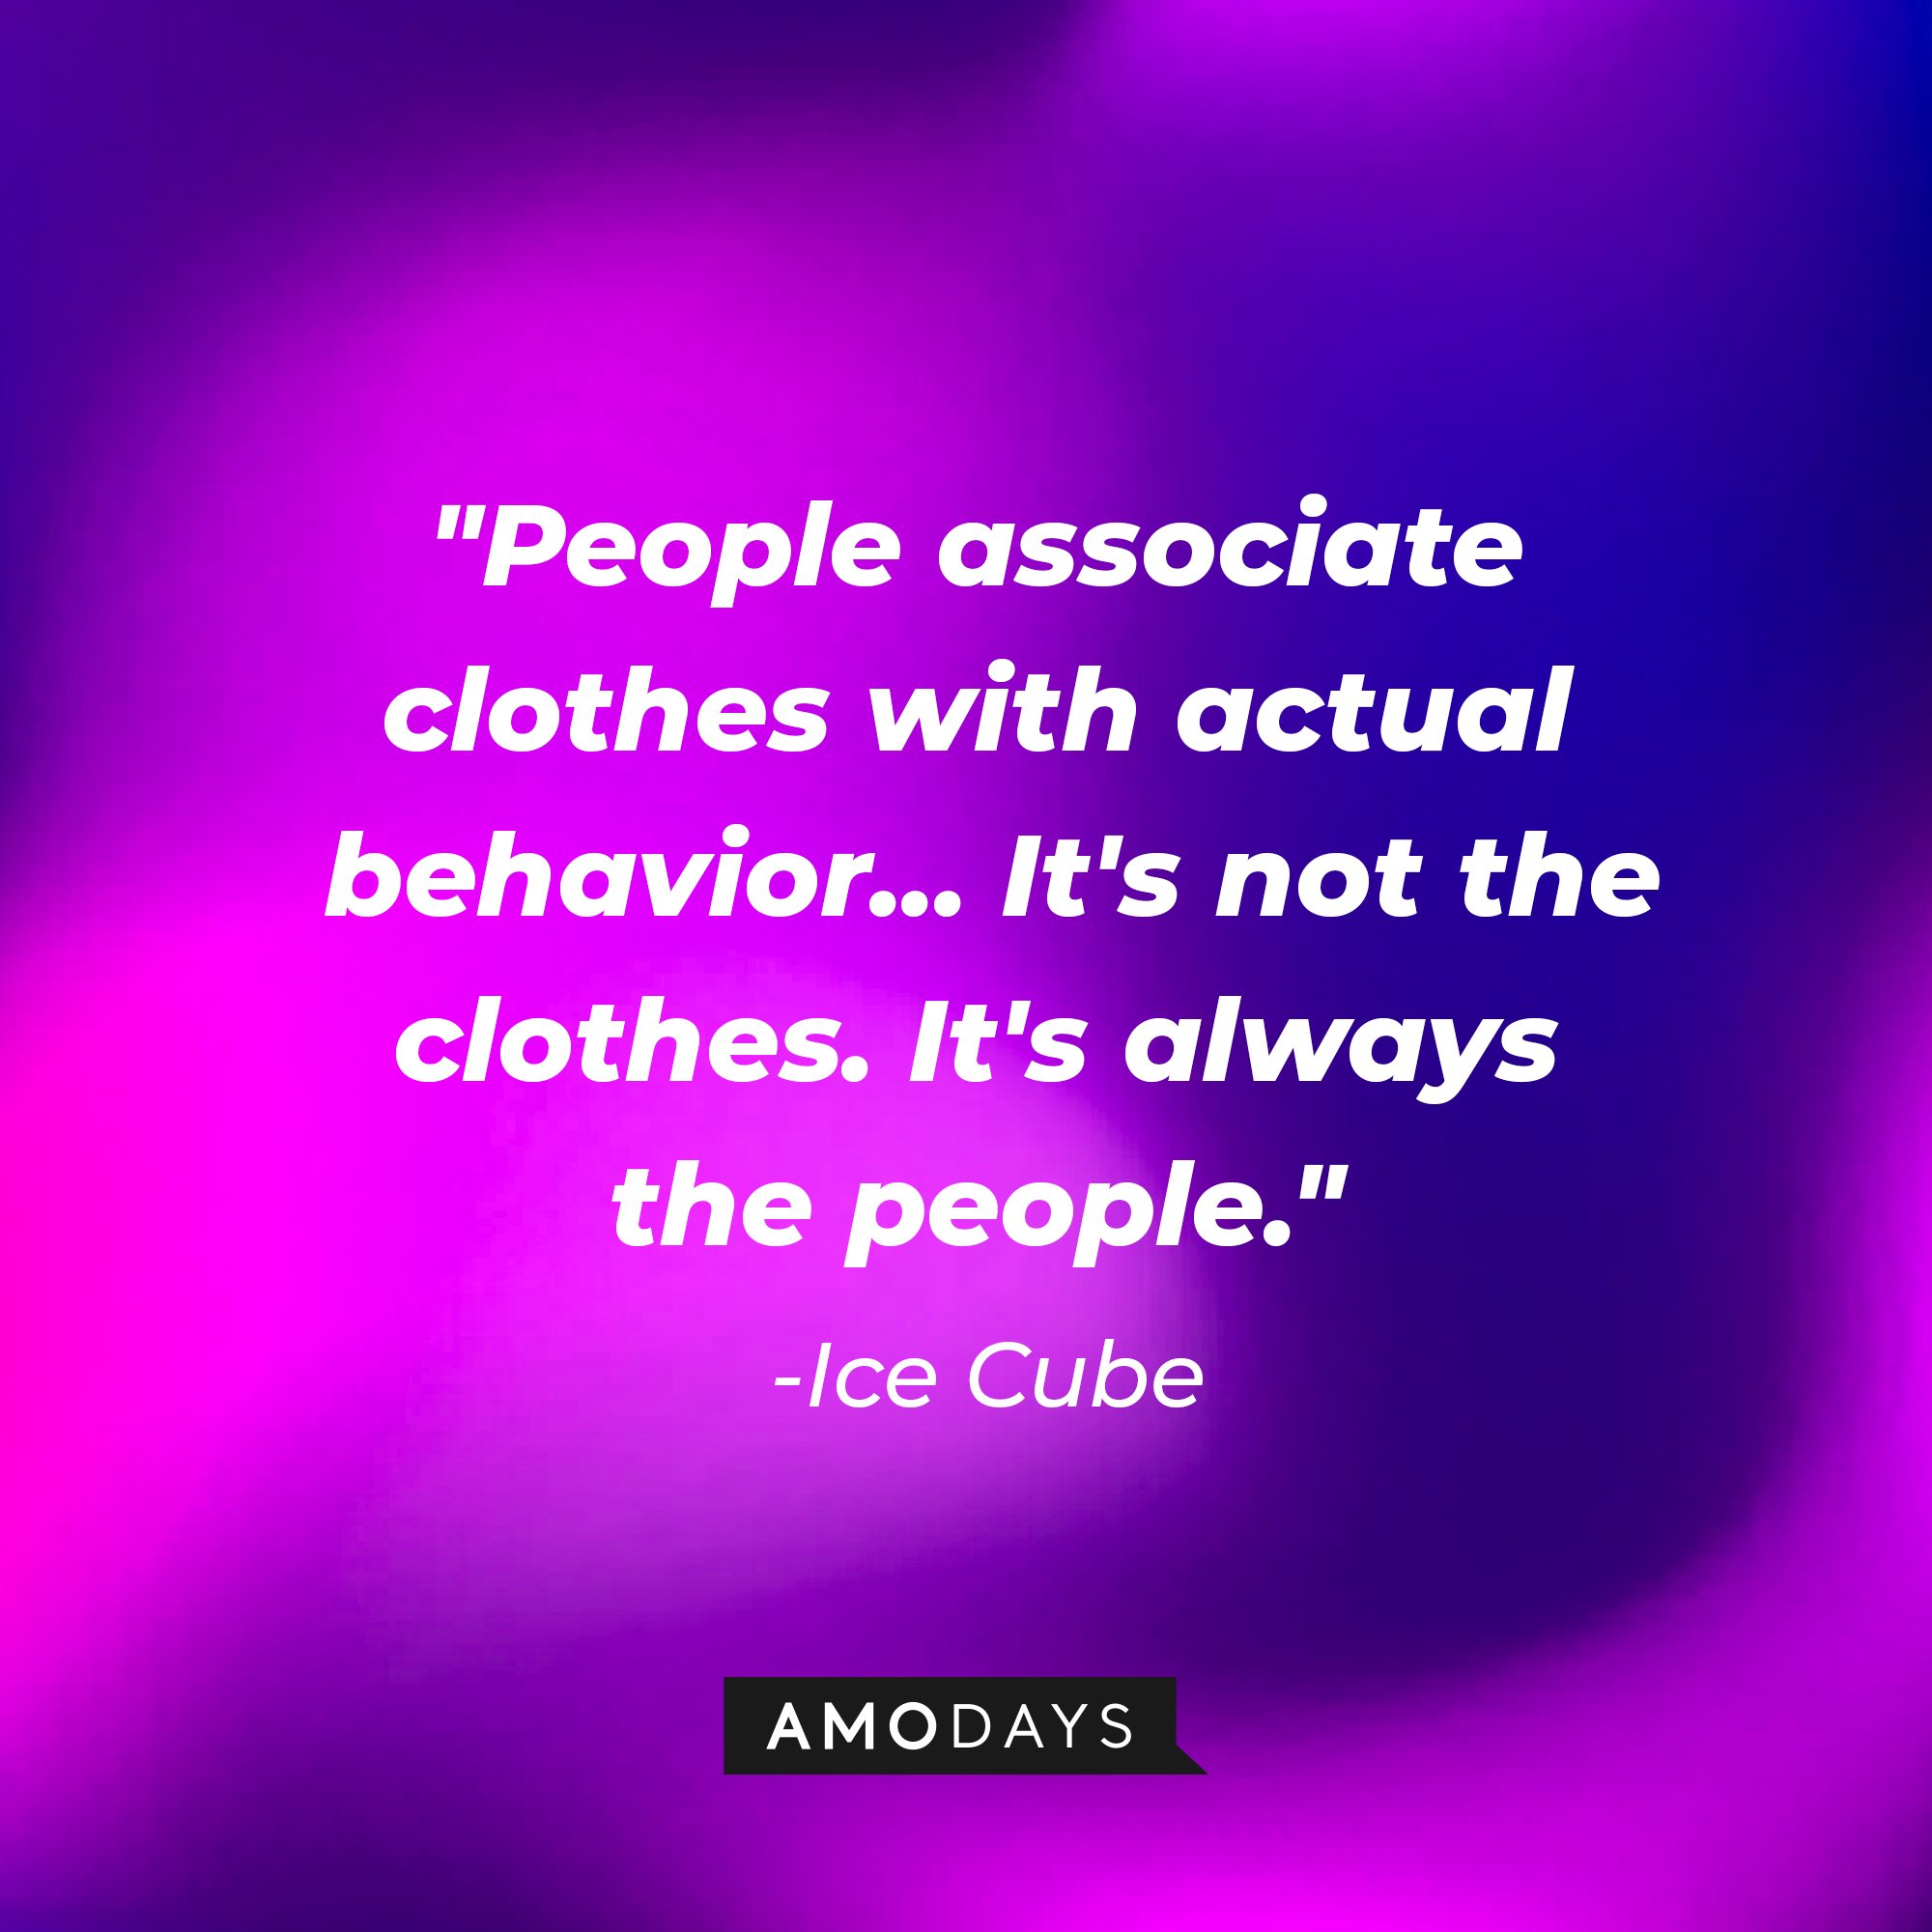 Ice Cube's quote: "People associate clothes with actual behavior... It's not the clothes. It's always the people." — Ice Cube | Image: AmoDays